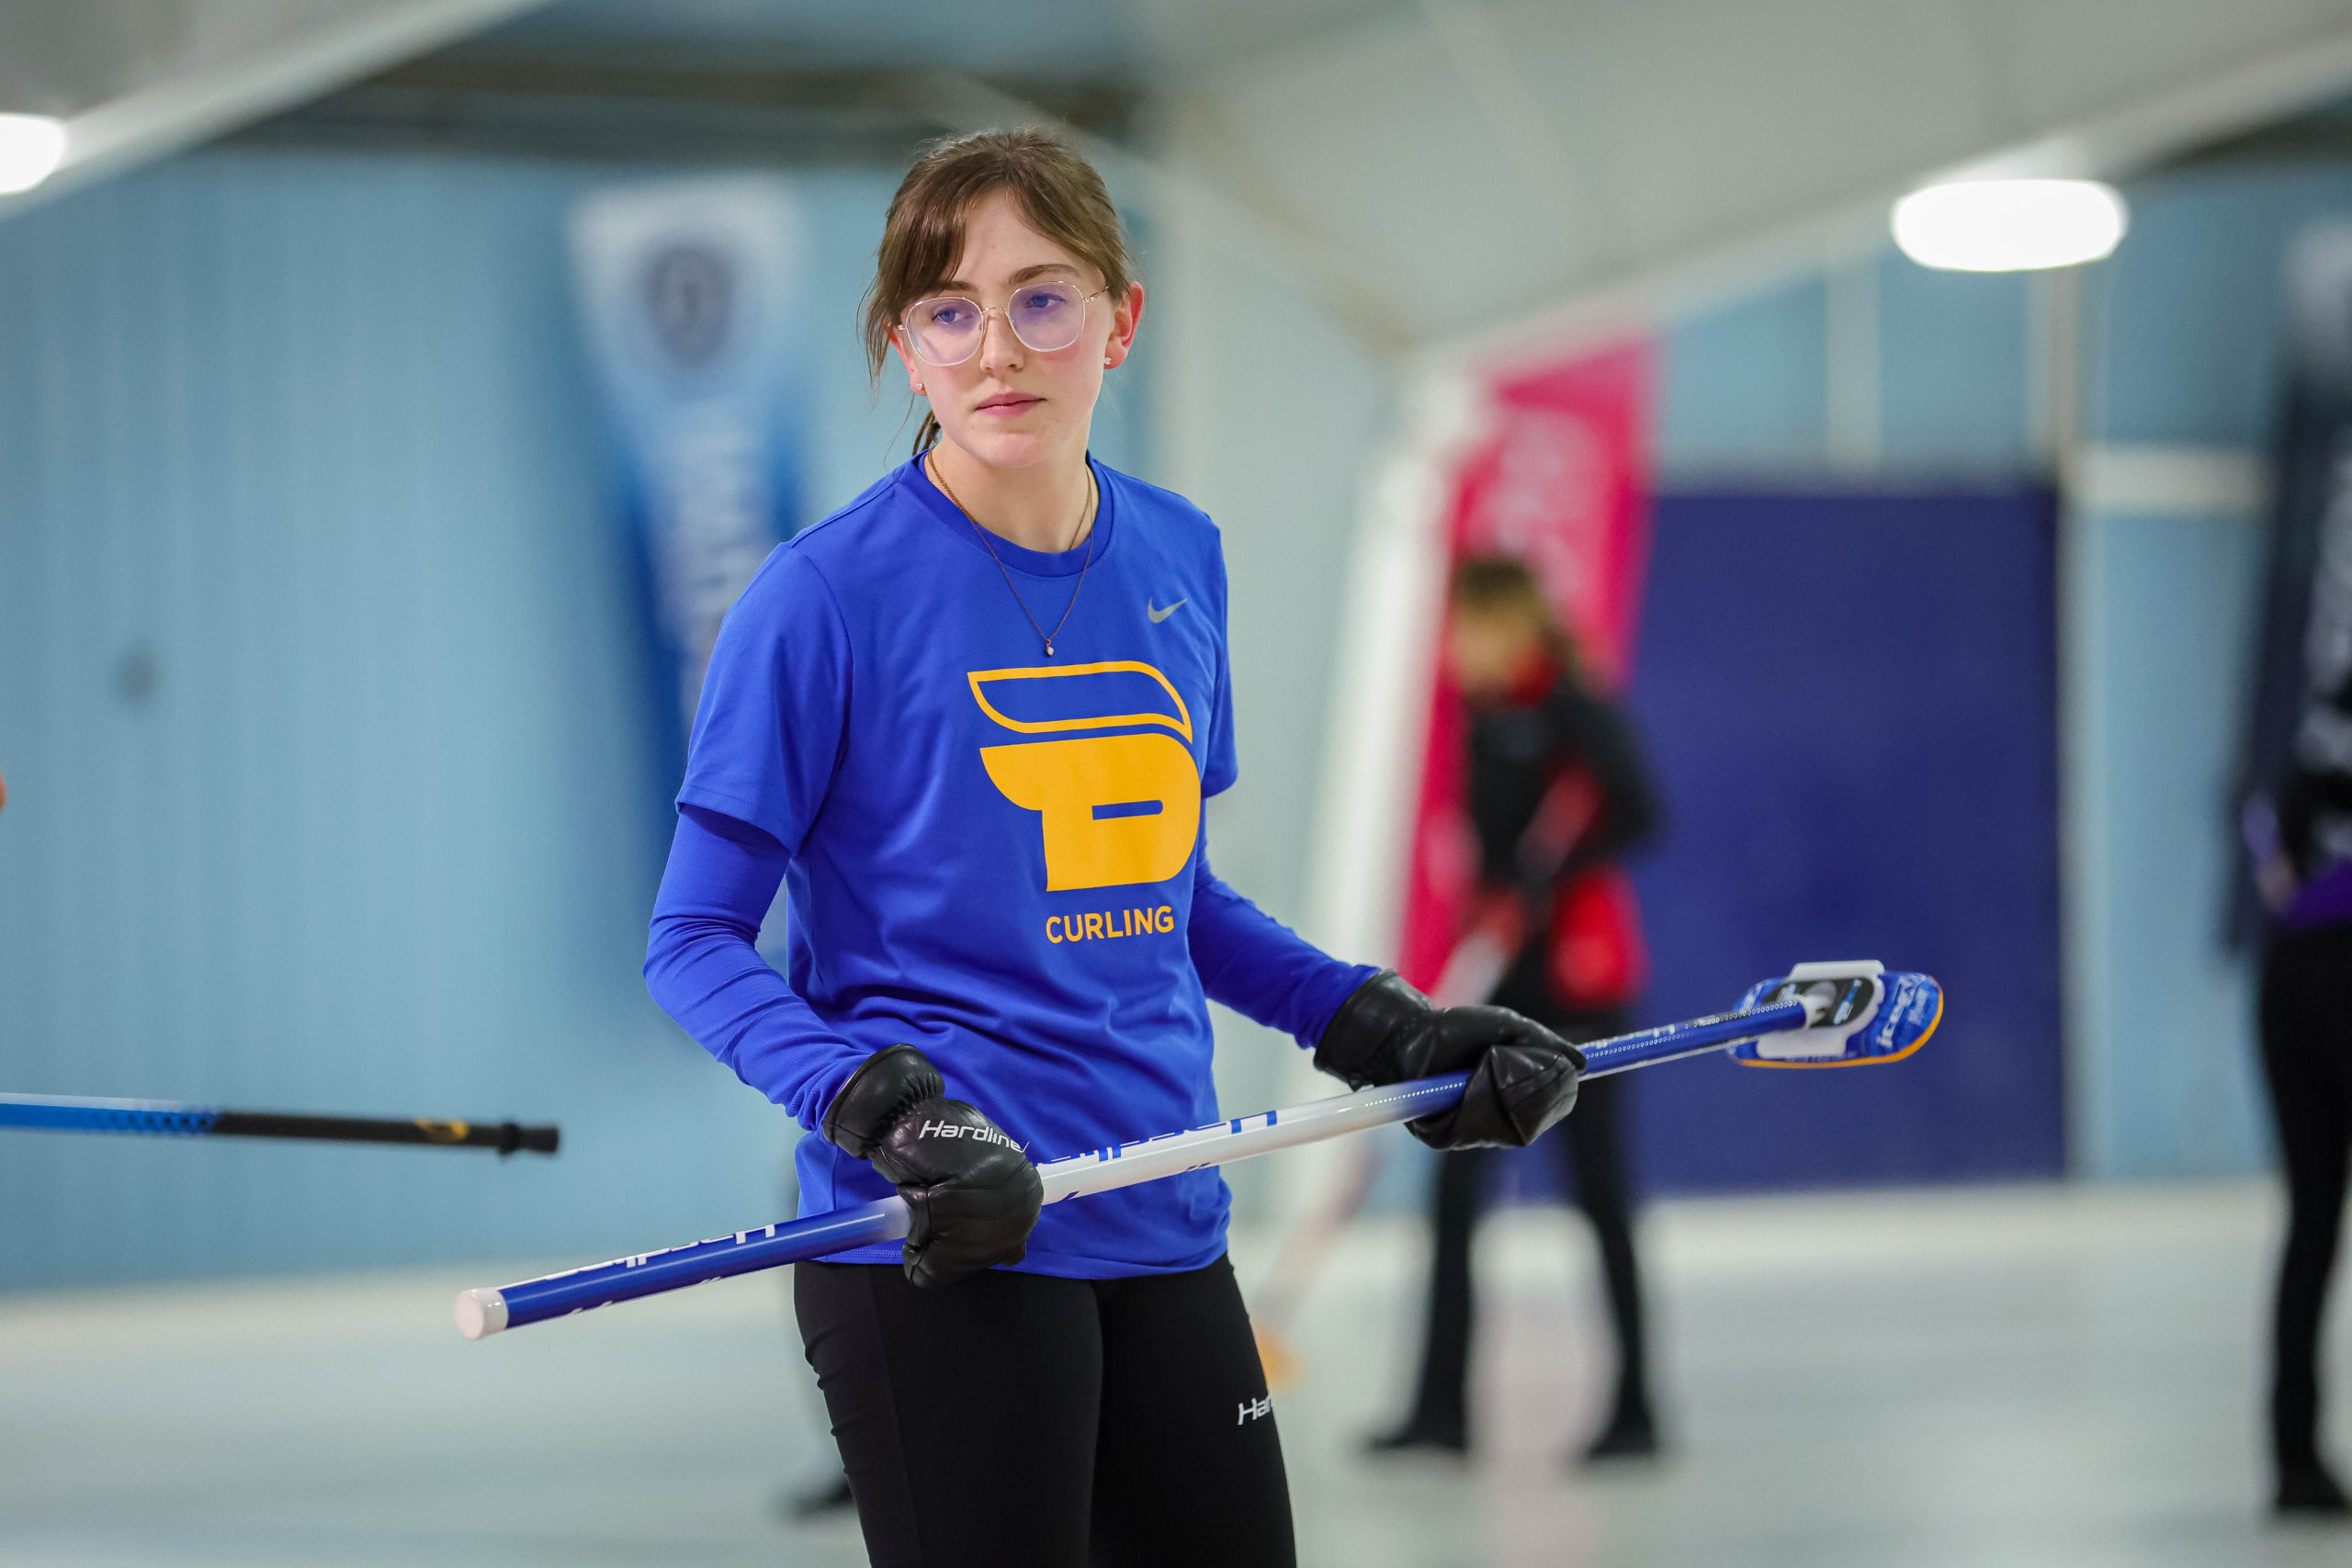 A TMU women's curling player stands with a broom on the ice